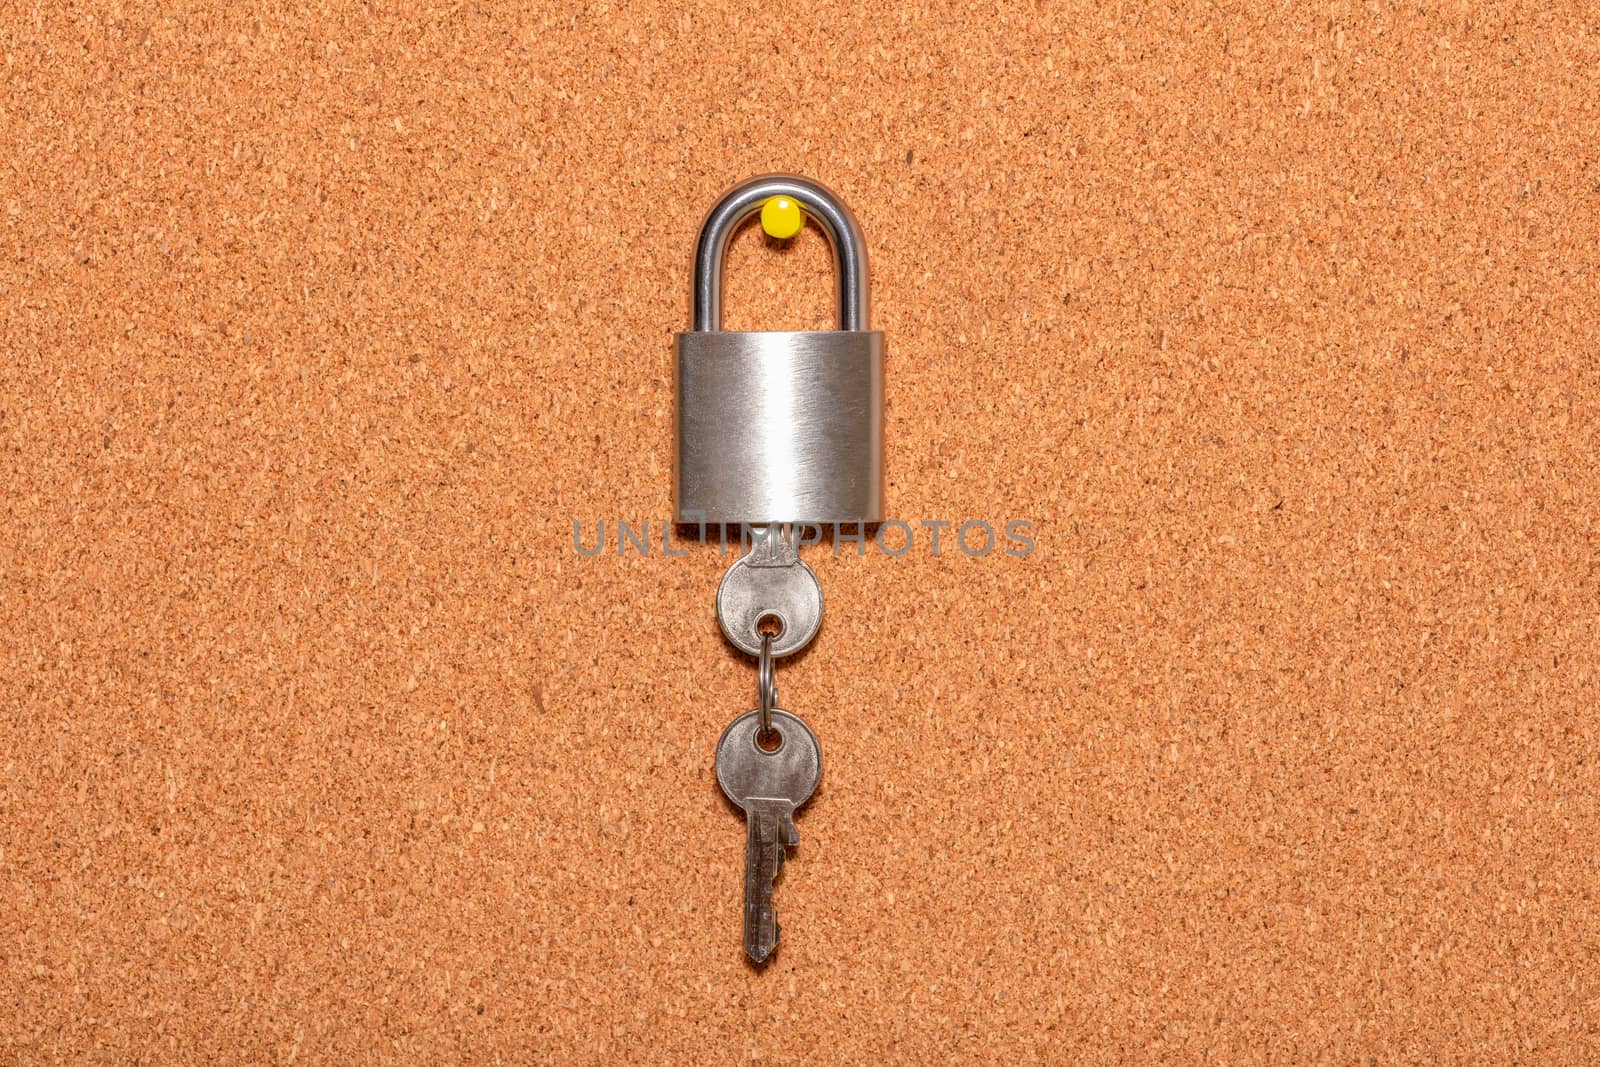 Closed padlock with keys hanging from it on an empty corkwood notice board in business office. Safety and security reminder, business closure, business for sale concepts. by DamantisZ